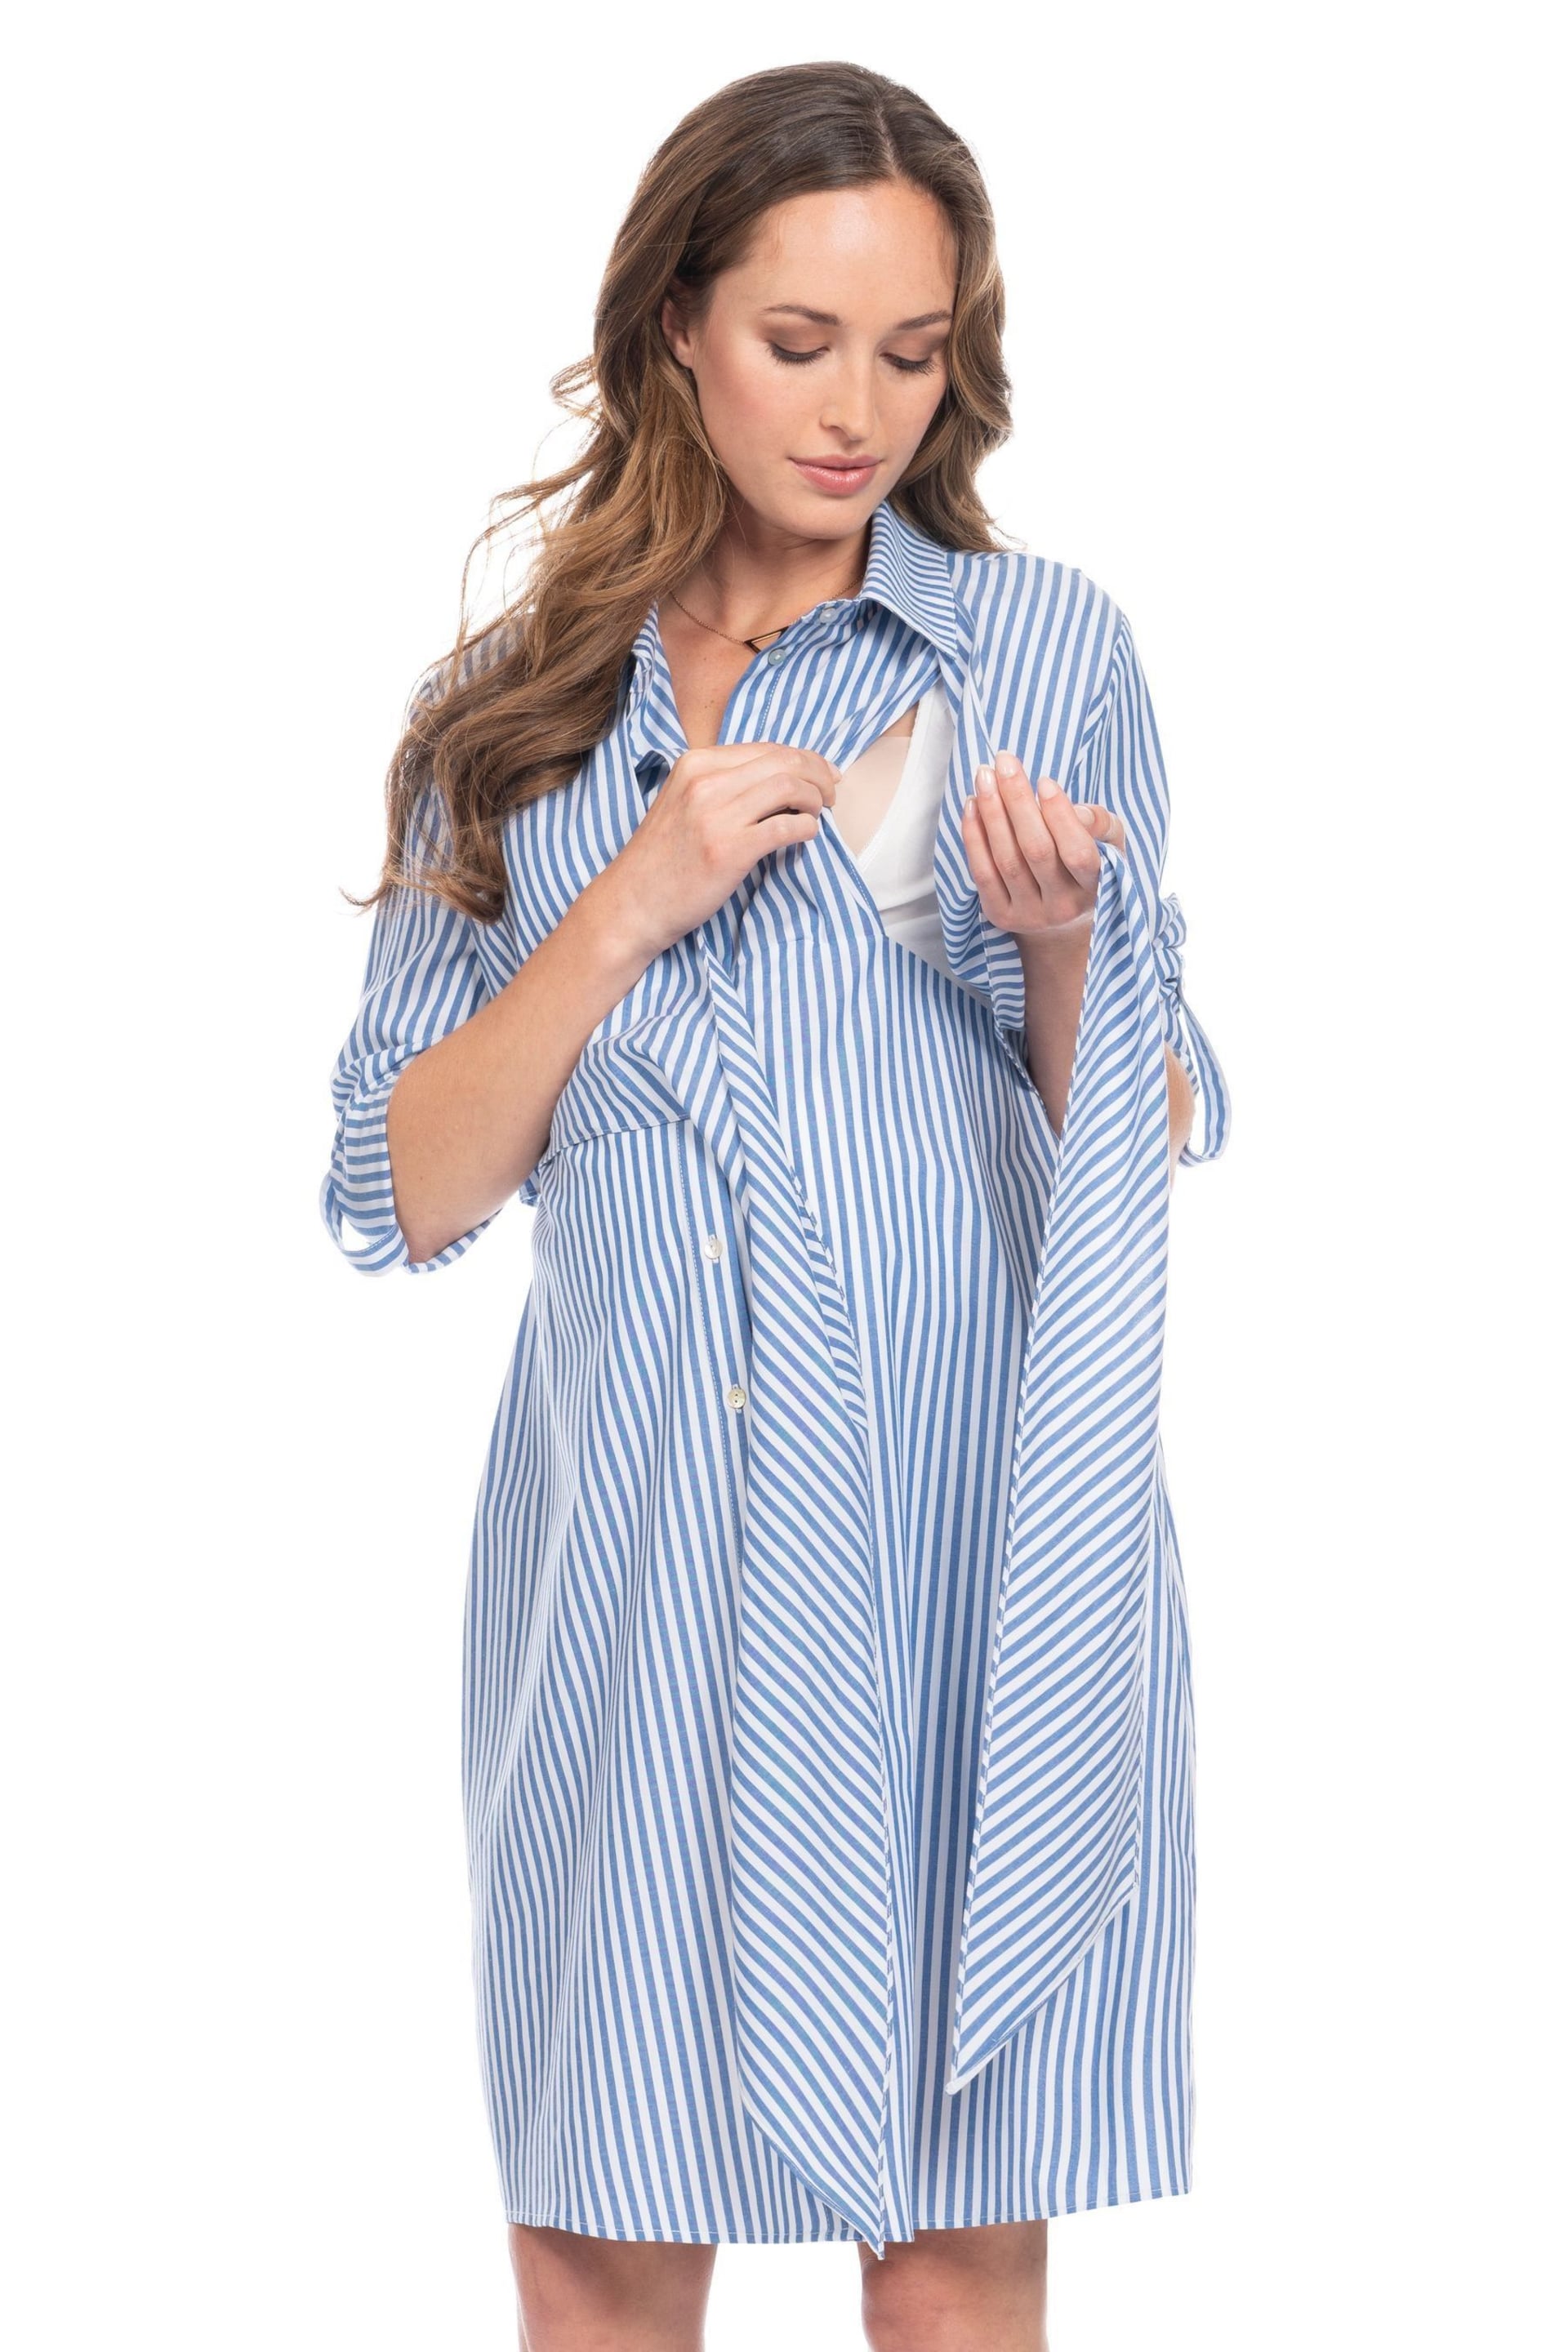 Seraphine Blue Stripe Cotton And Lyocell Maternity And Nursing Shirt Dress - Image 4 of 6